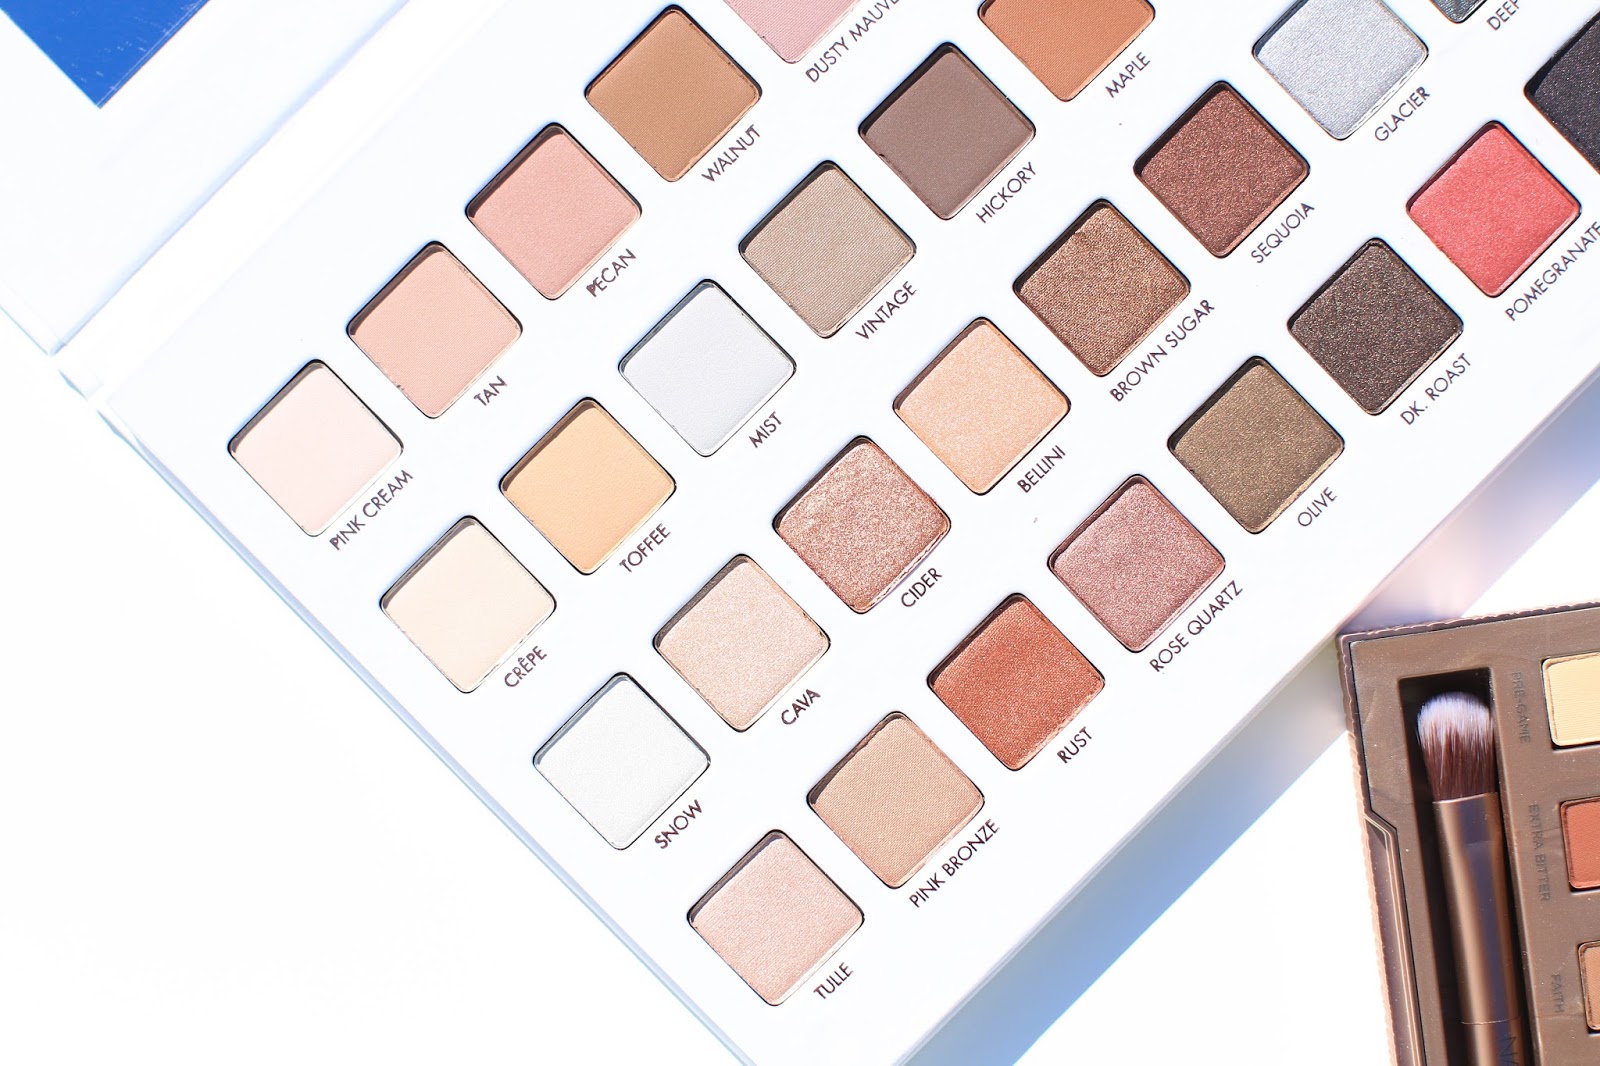 Lorac Mega Pro Palette 3 review with swatches